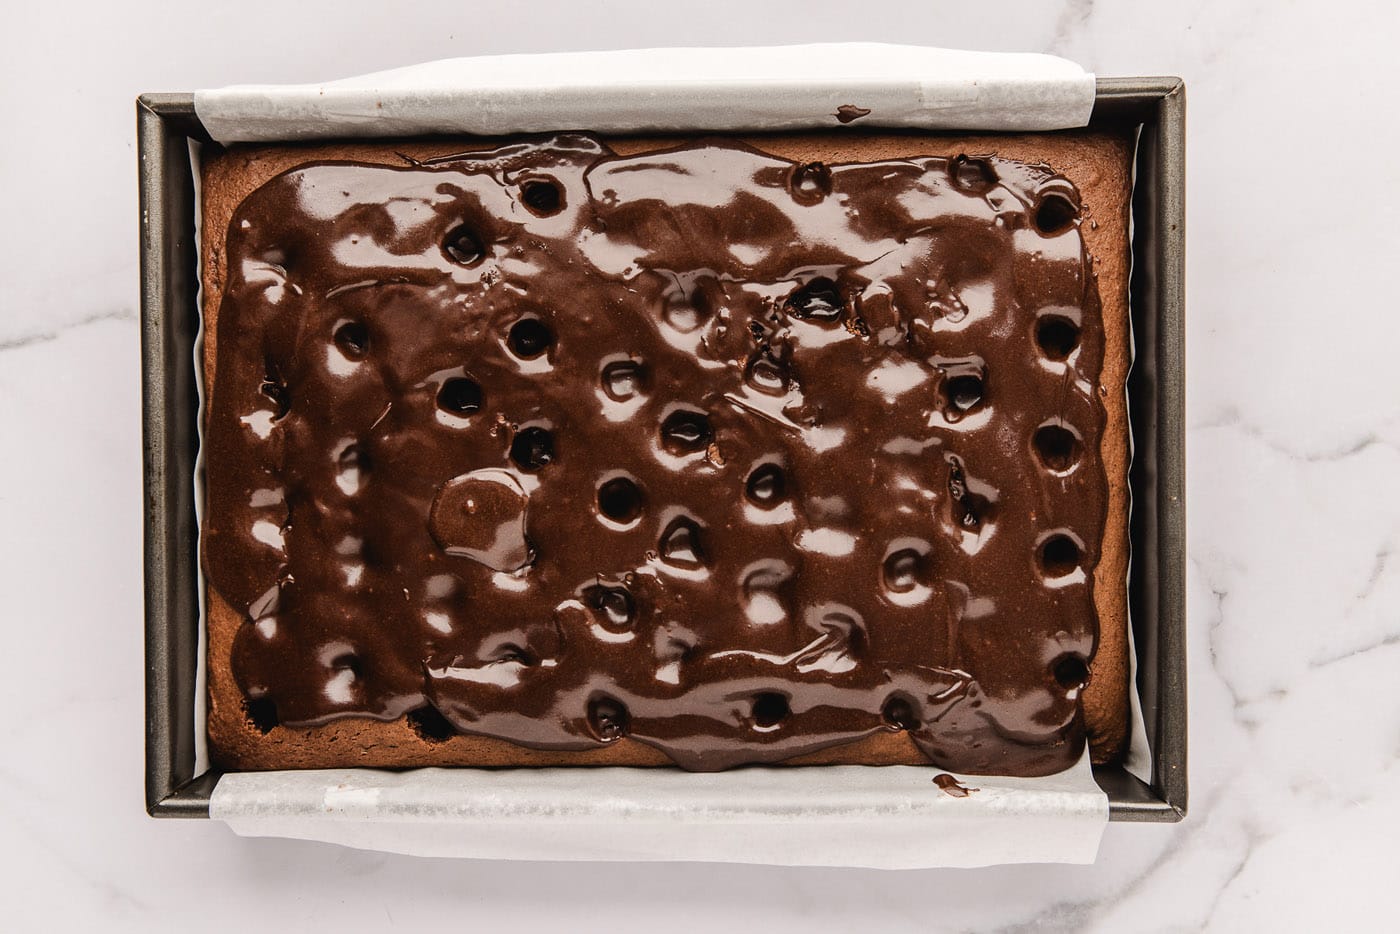 fudge sauce poured over holes in chocolate cake